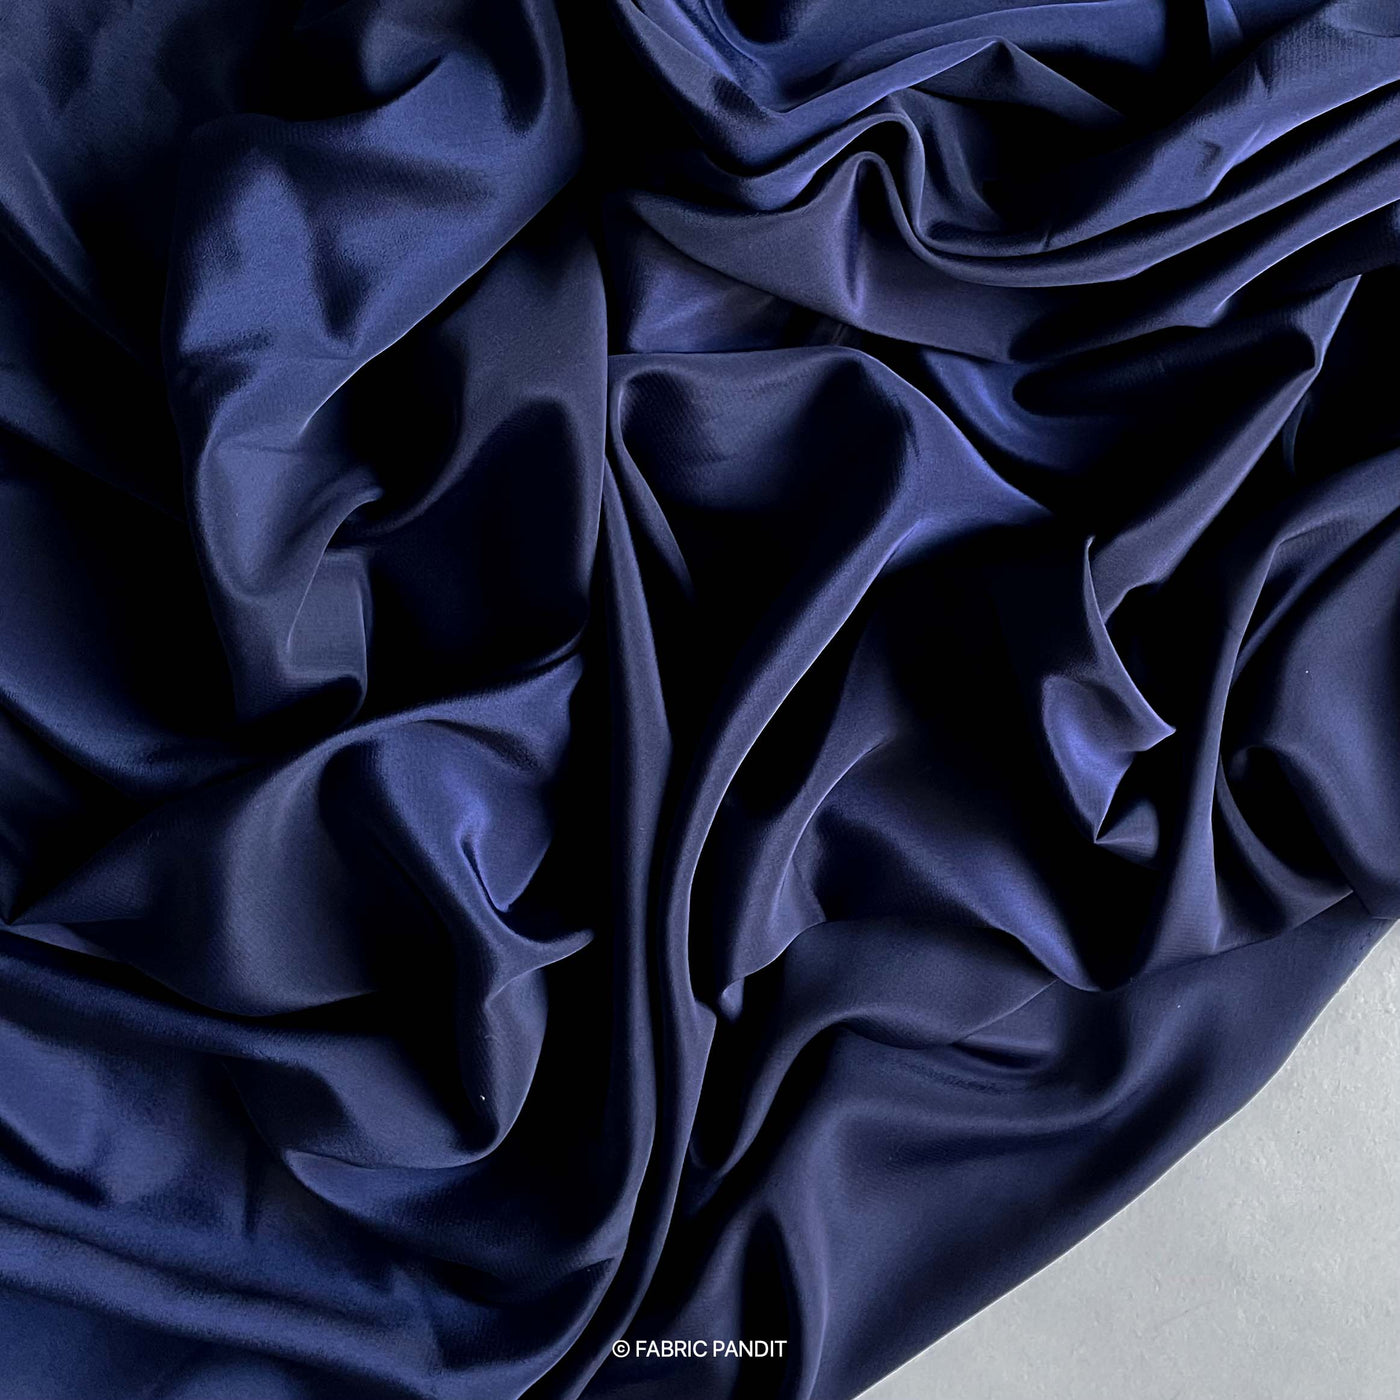 Fabric Pandit Fabric Oxford Blue Color Premium French Crepe Fabric (Width 44 inches)